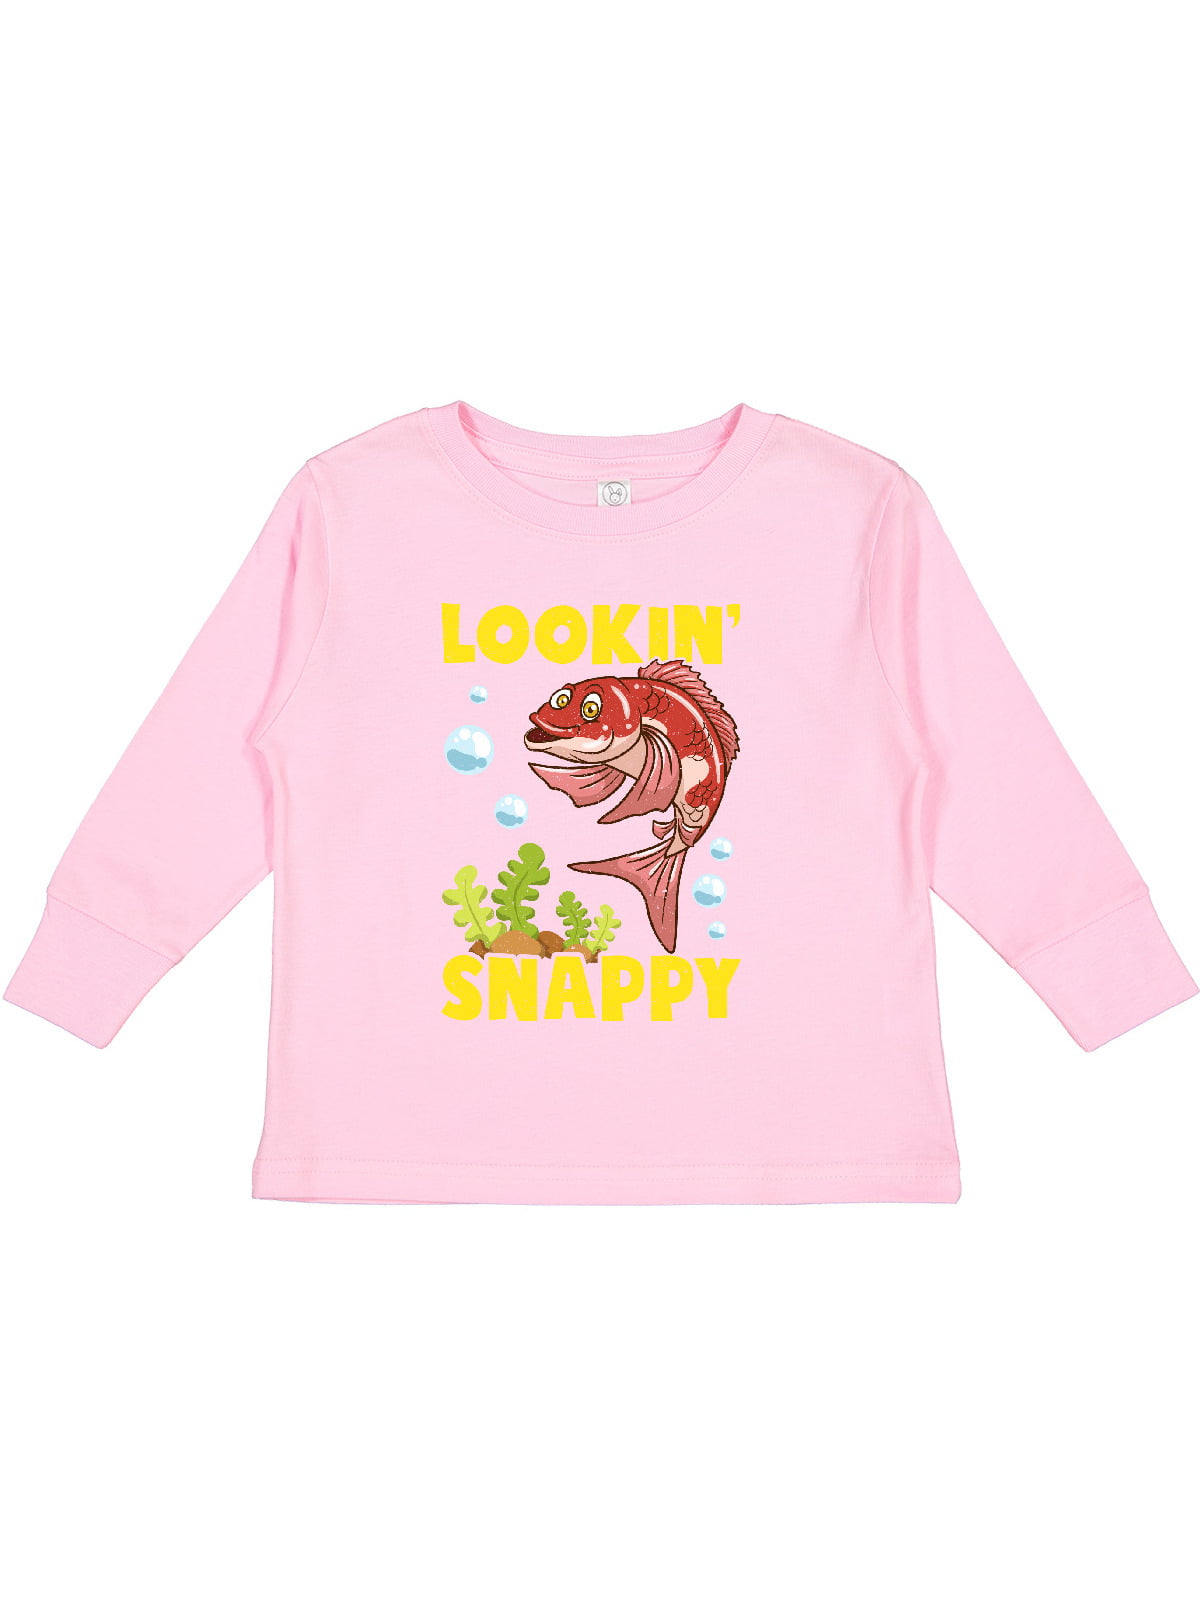 Inktastic Red Snapper Funny Fish Boys or Girls Long Sleeve Toddler T-Shirt  